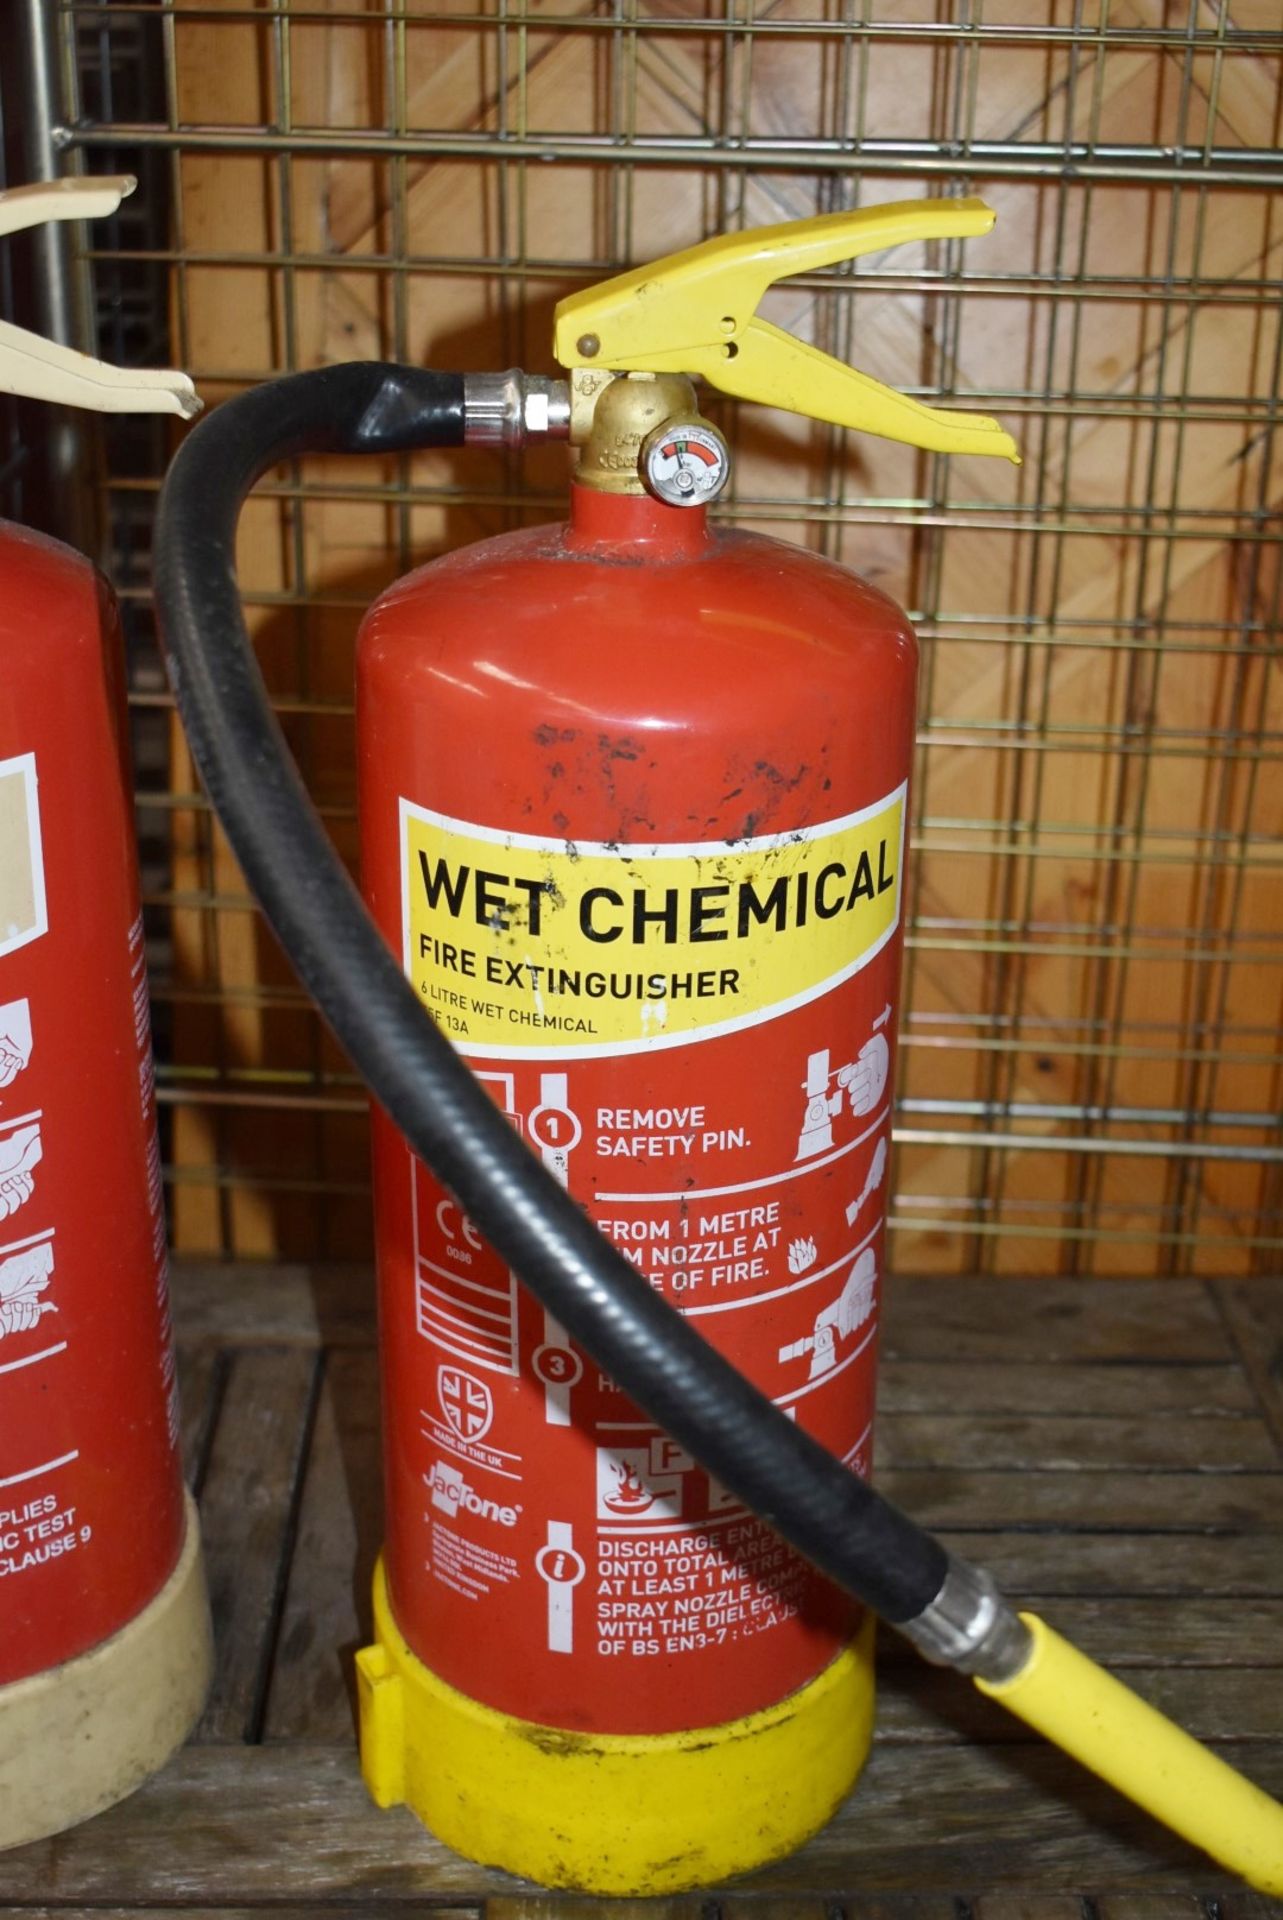 4 x Various Fire Extinguishers - Includes Power, Foam and Wet Chemical - CL011 - Ref: GCA408 WH5 - - Image 4 of 4